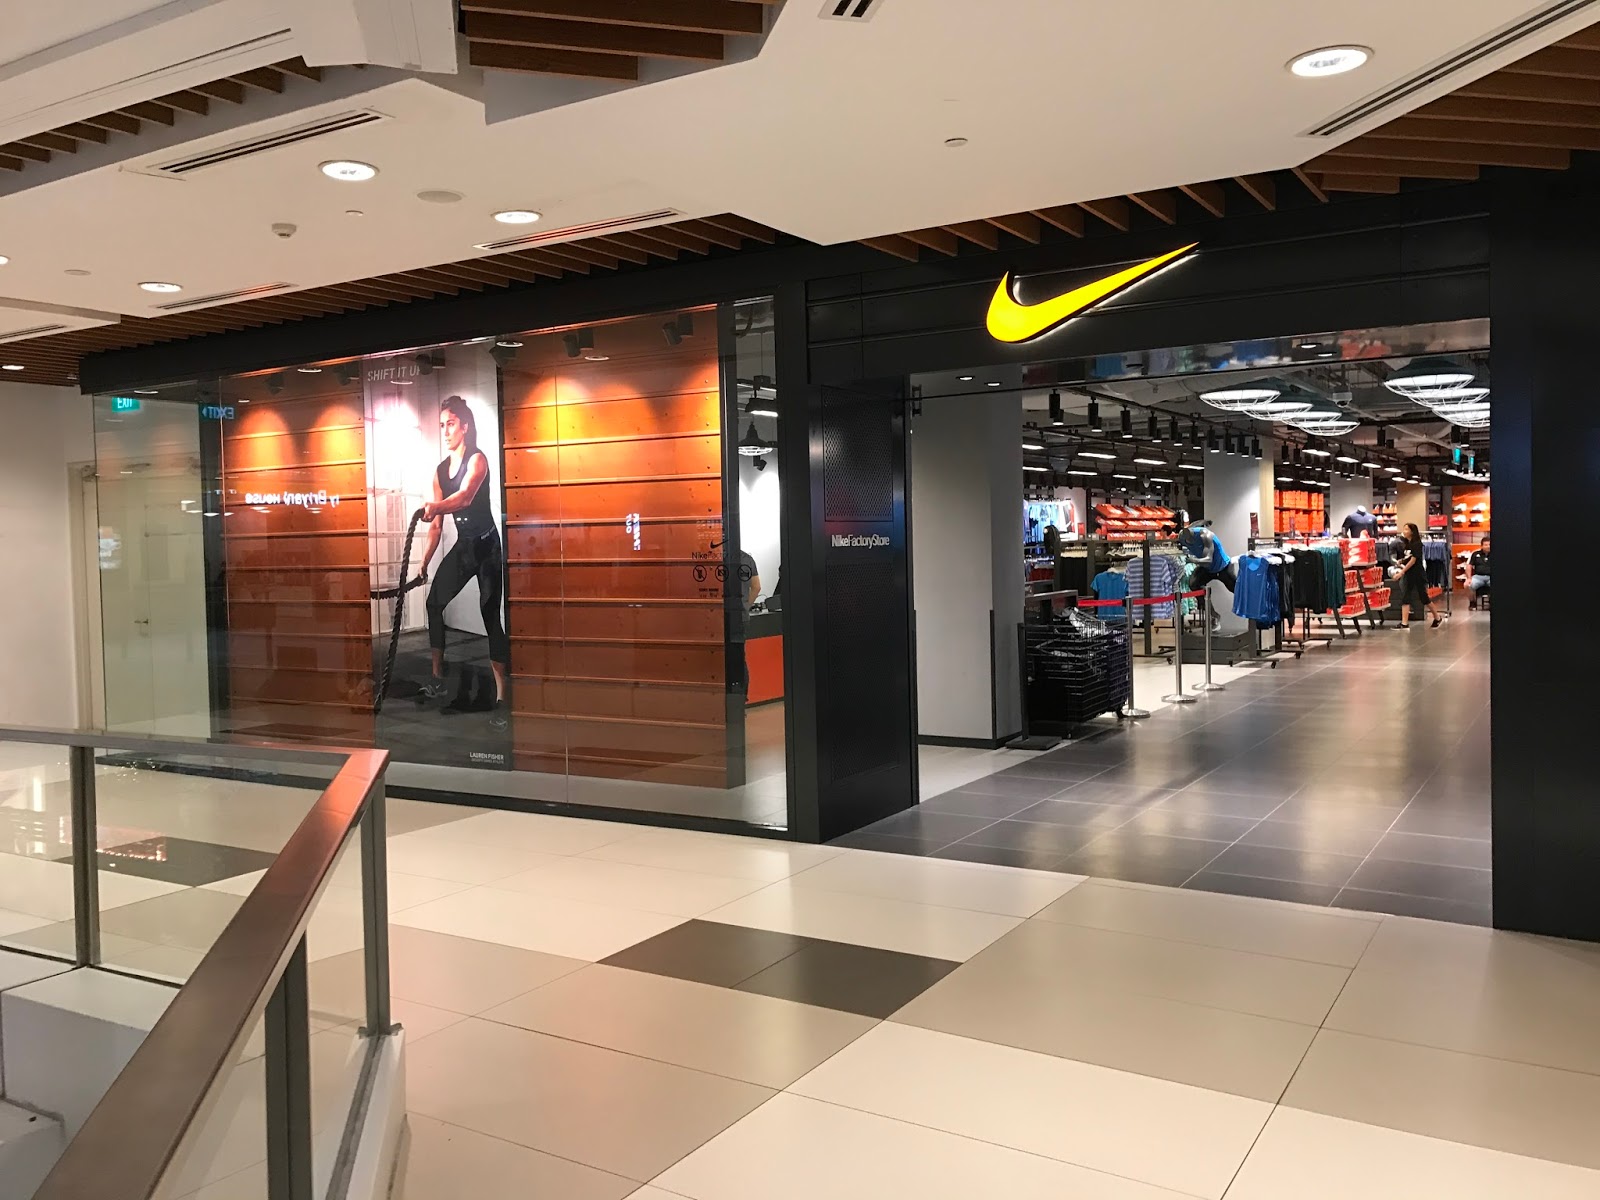 Shopping for running shoes? The best place in Singapore to go is…